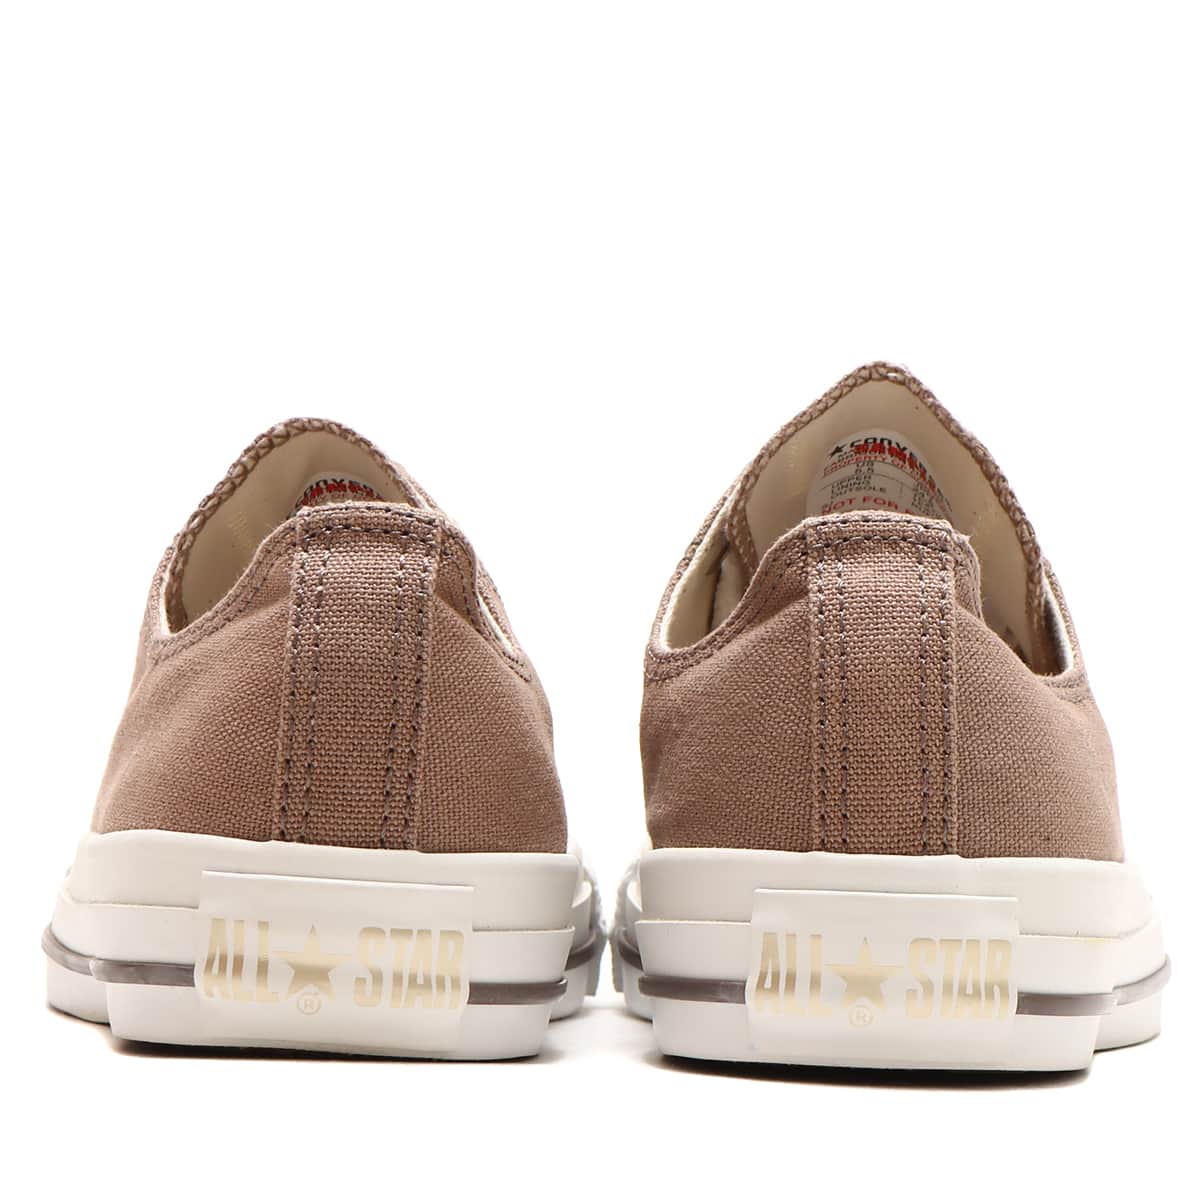 CONVERSE ALL STAR FLAT EYELETS CG OX TAUPE